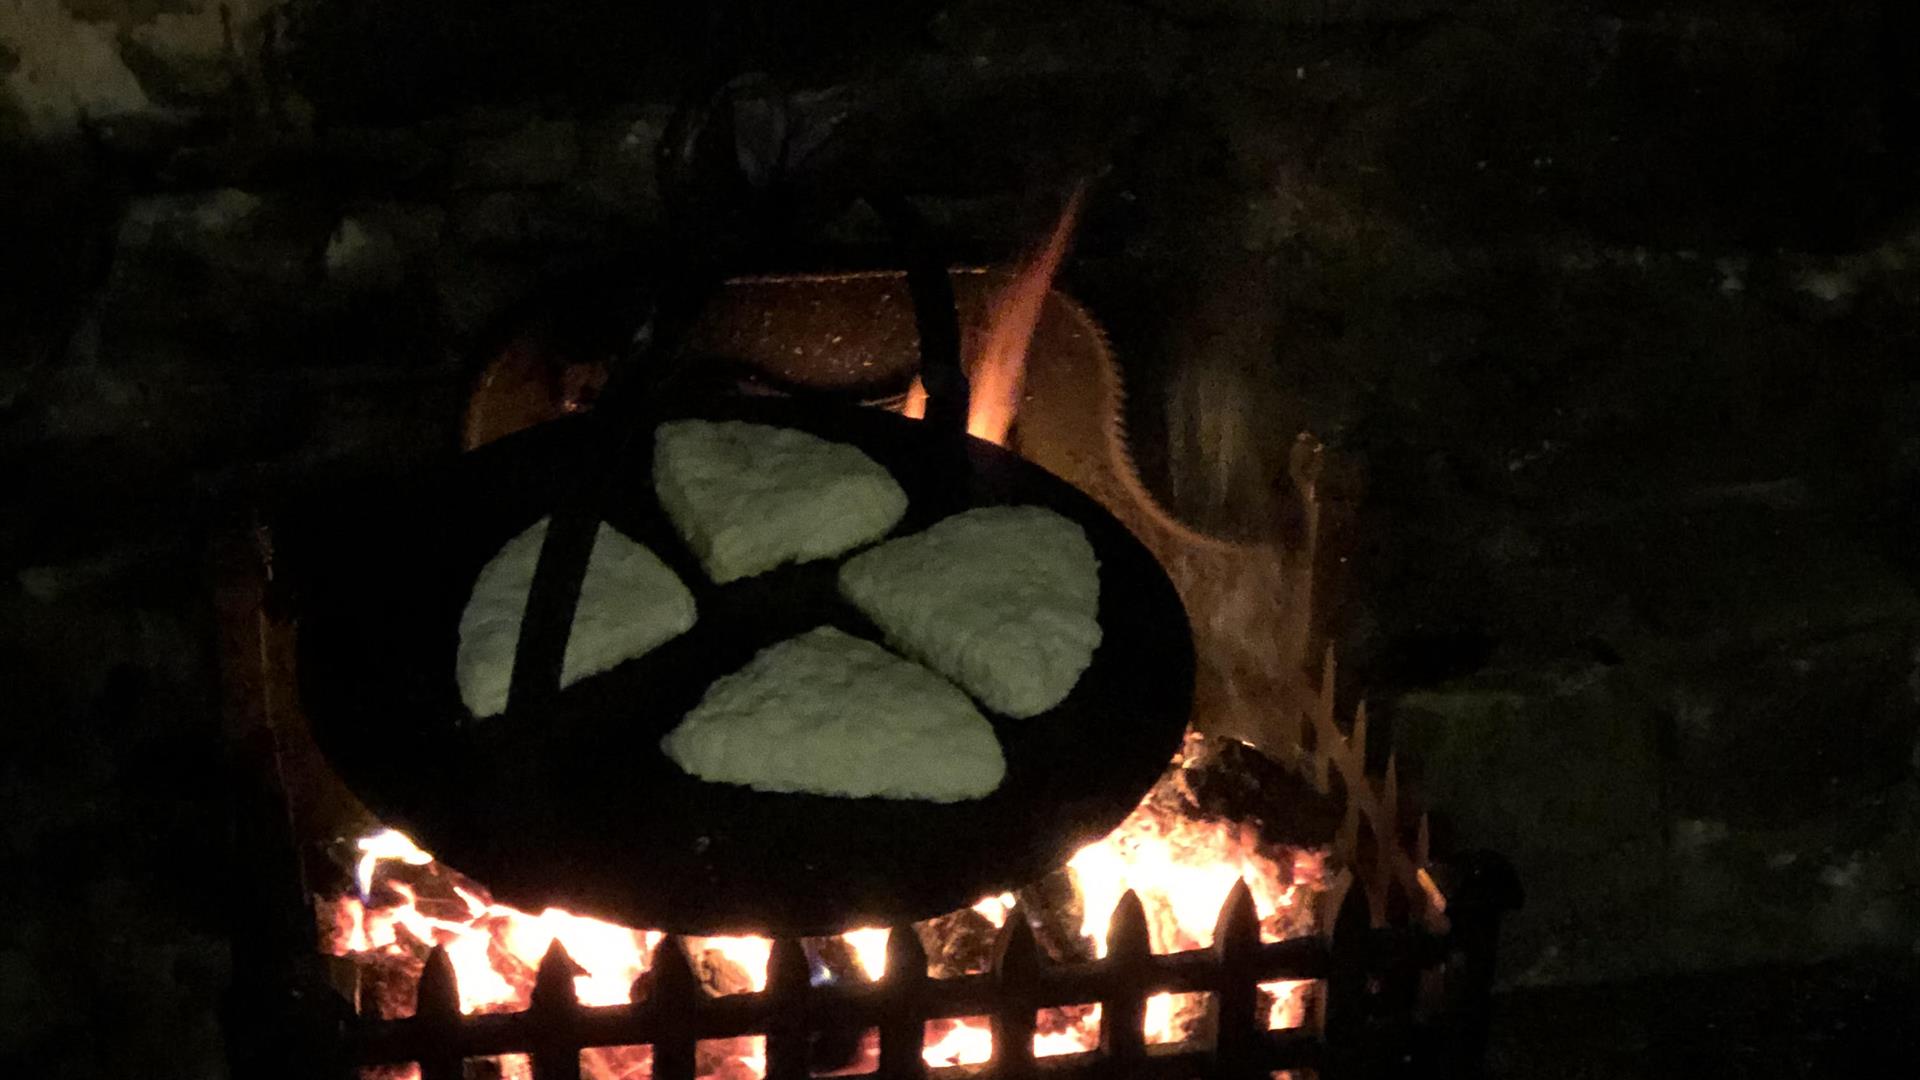 Making Soda Breads the traditional way over an open fire